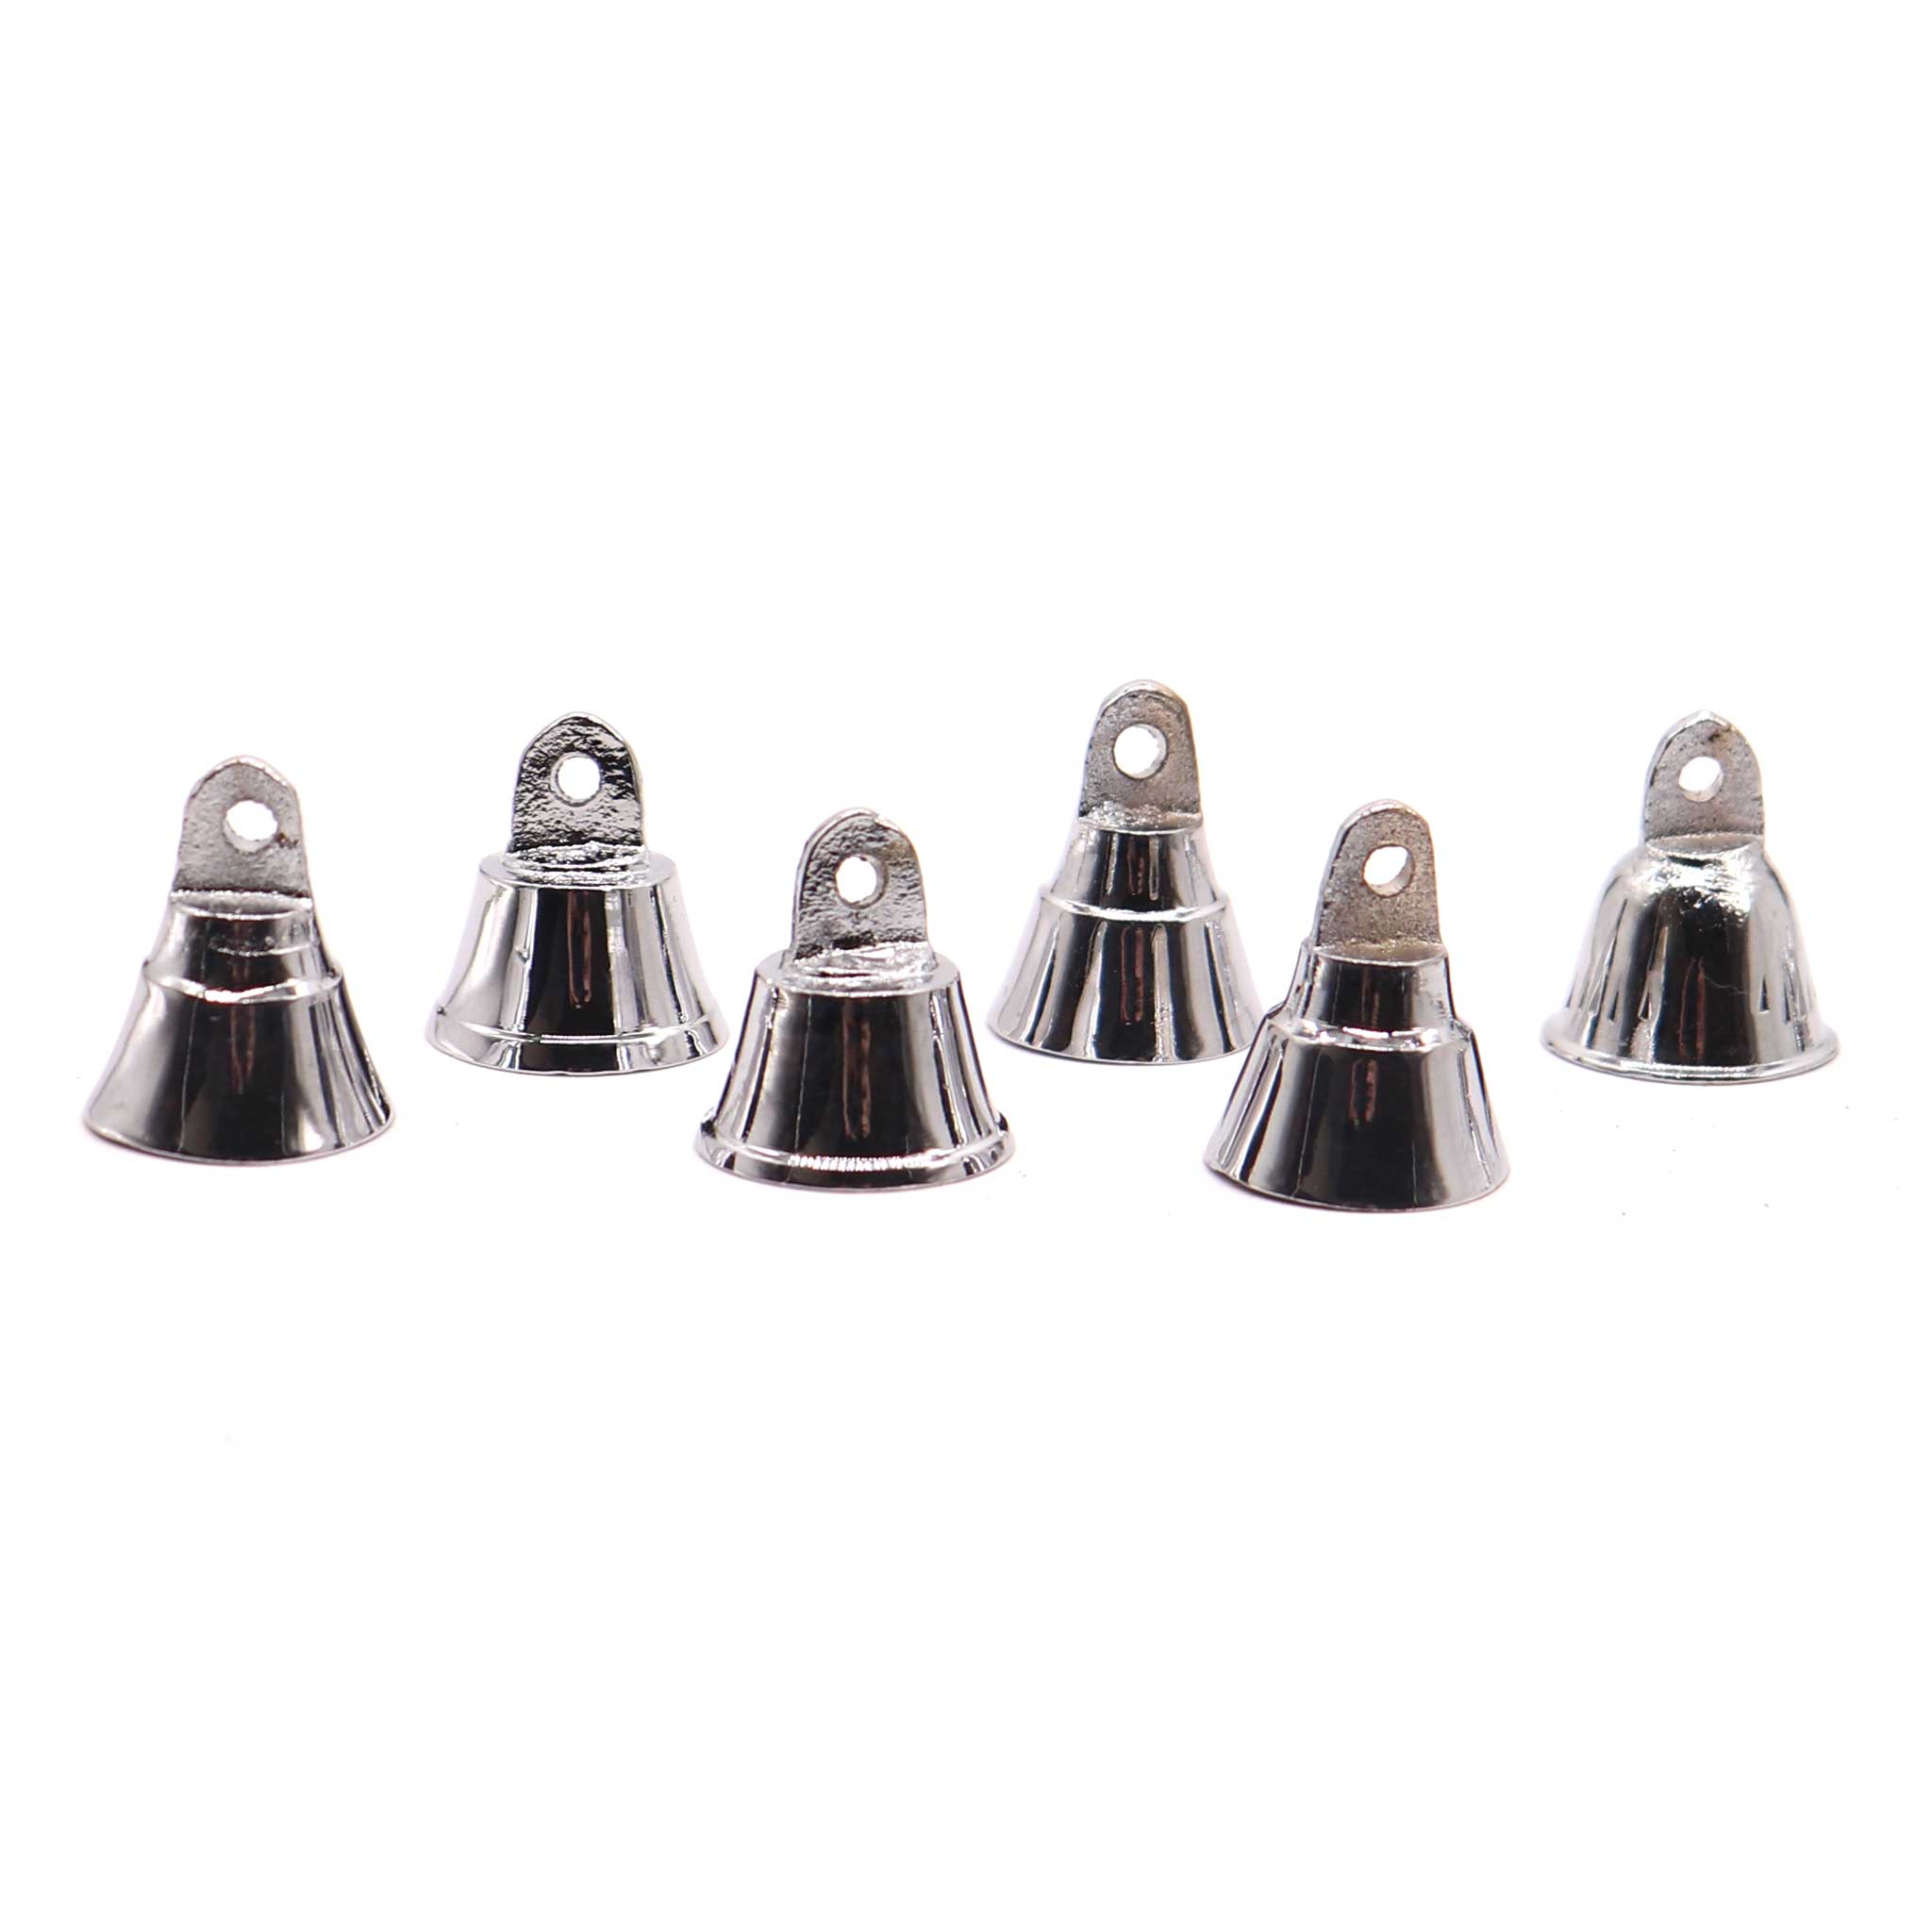 Silver Bell 1 Inch - 13 Moons